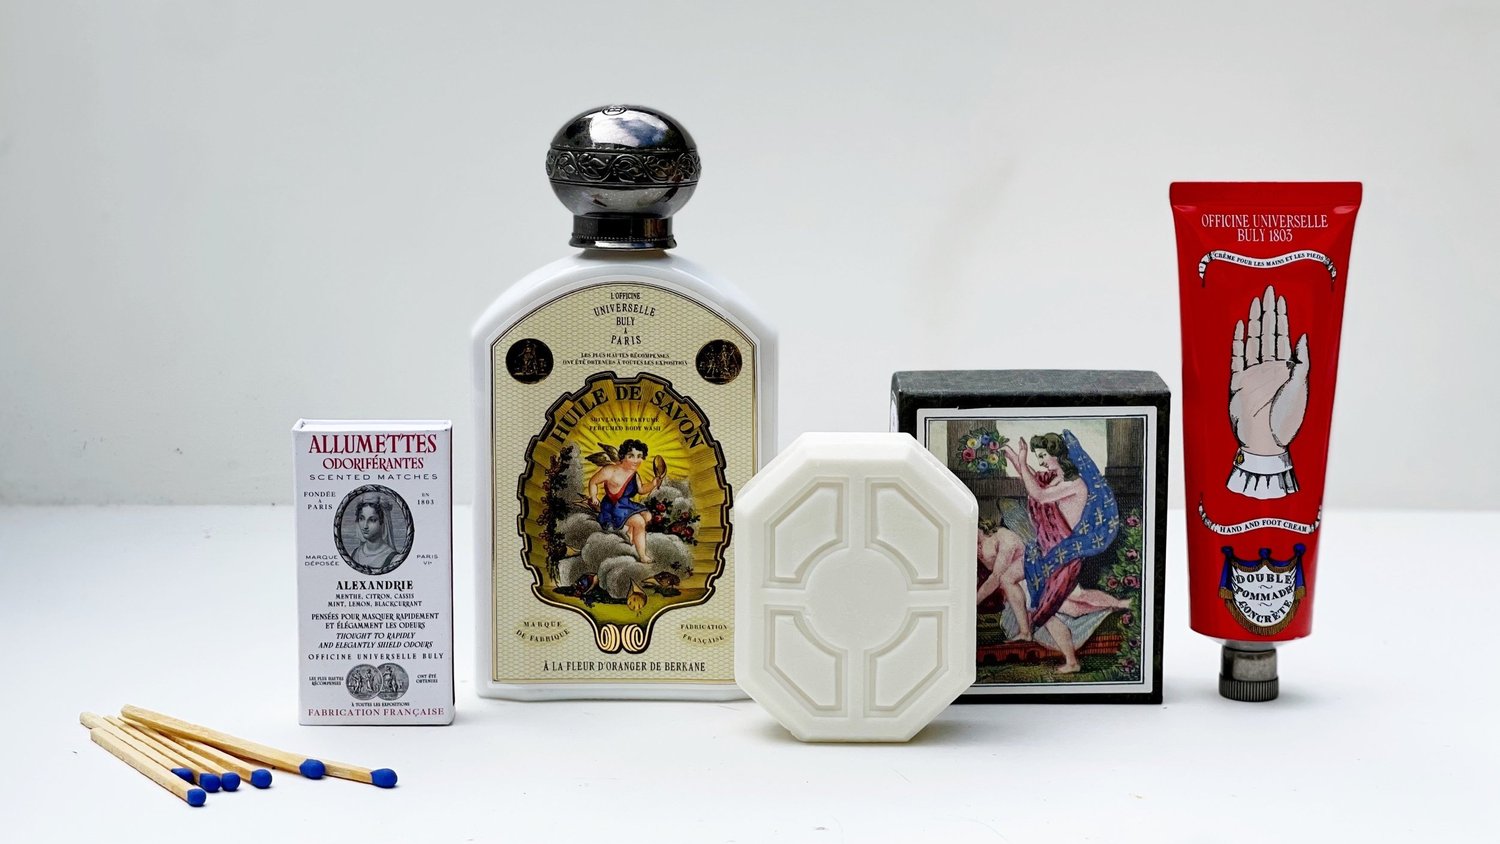 The Art of Gifting – Officine Universelle Buly